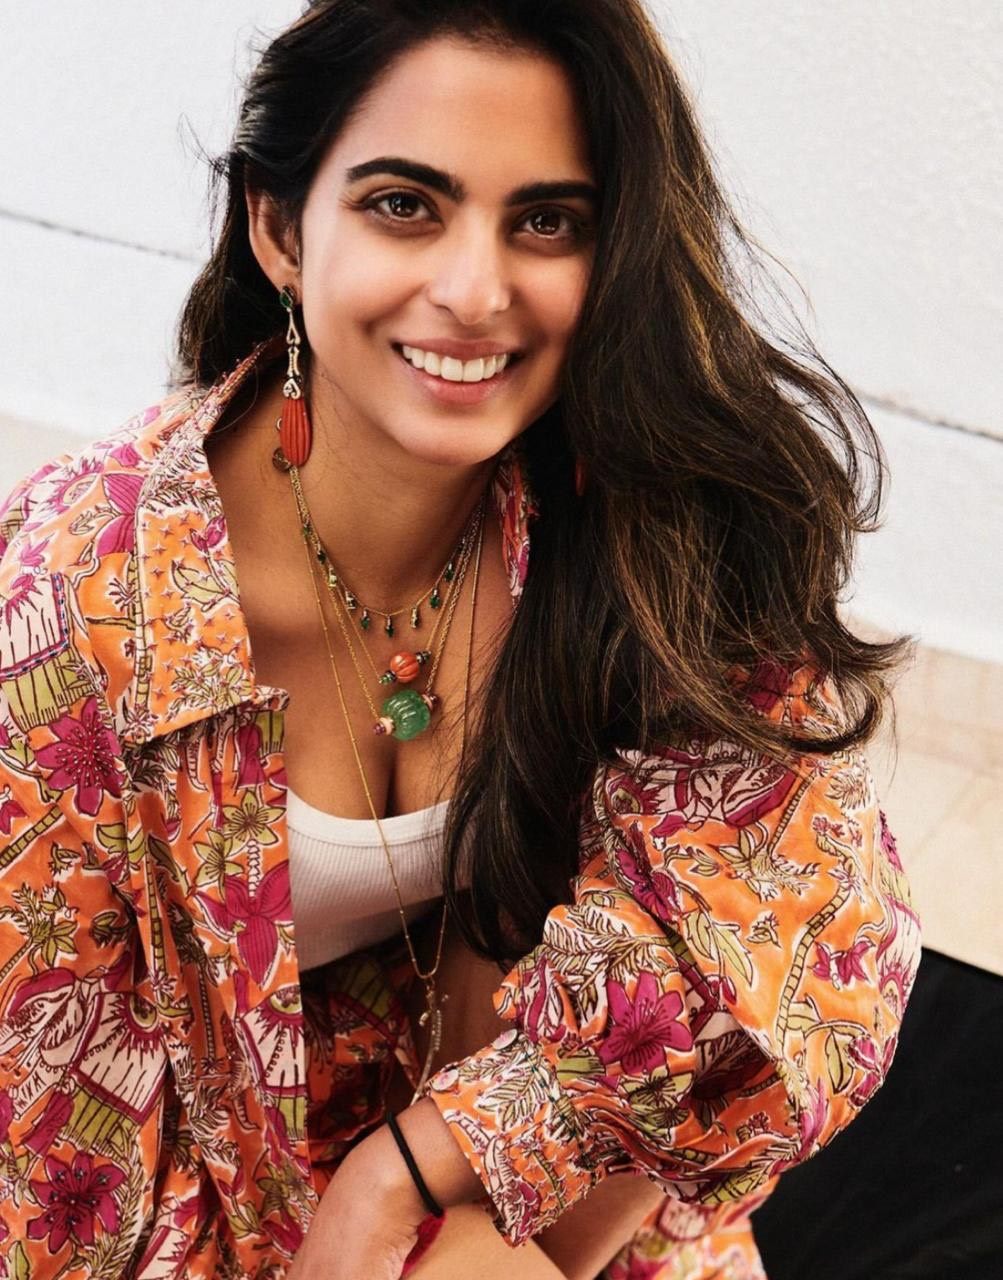 Indian jewellery’s modern designers like Anaita Shroff Adajania, Hanut Singh and Tallin – seen here on Isha Amani – are appealing to the likes of international stars as well as local A-listers. Photos: Handout